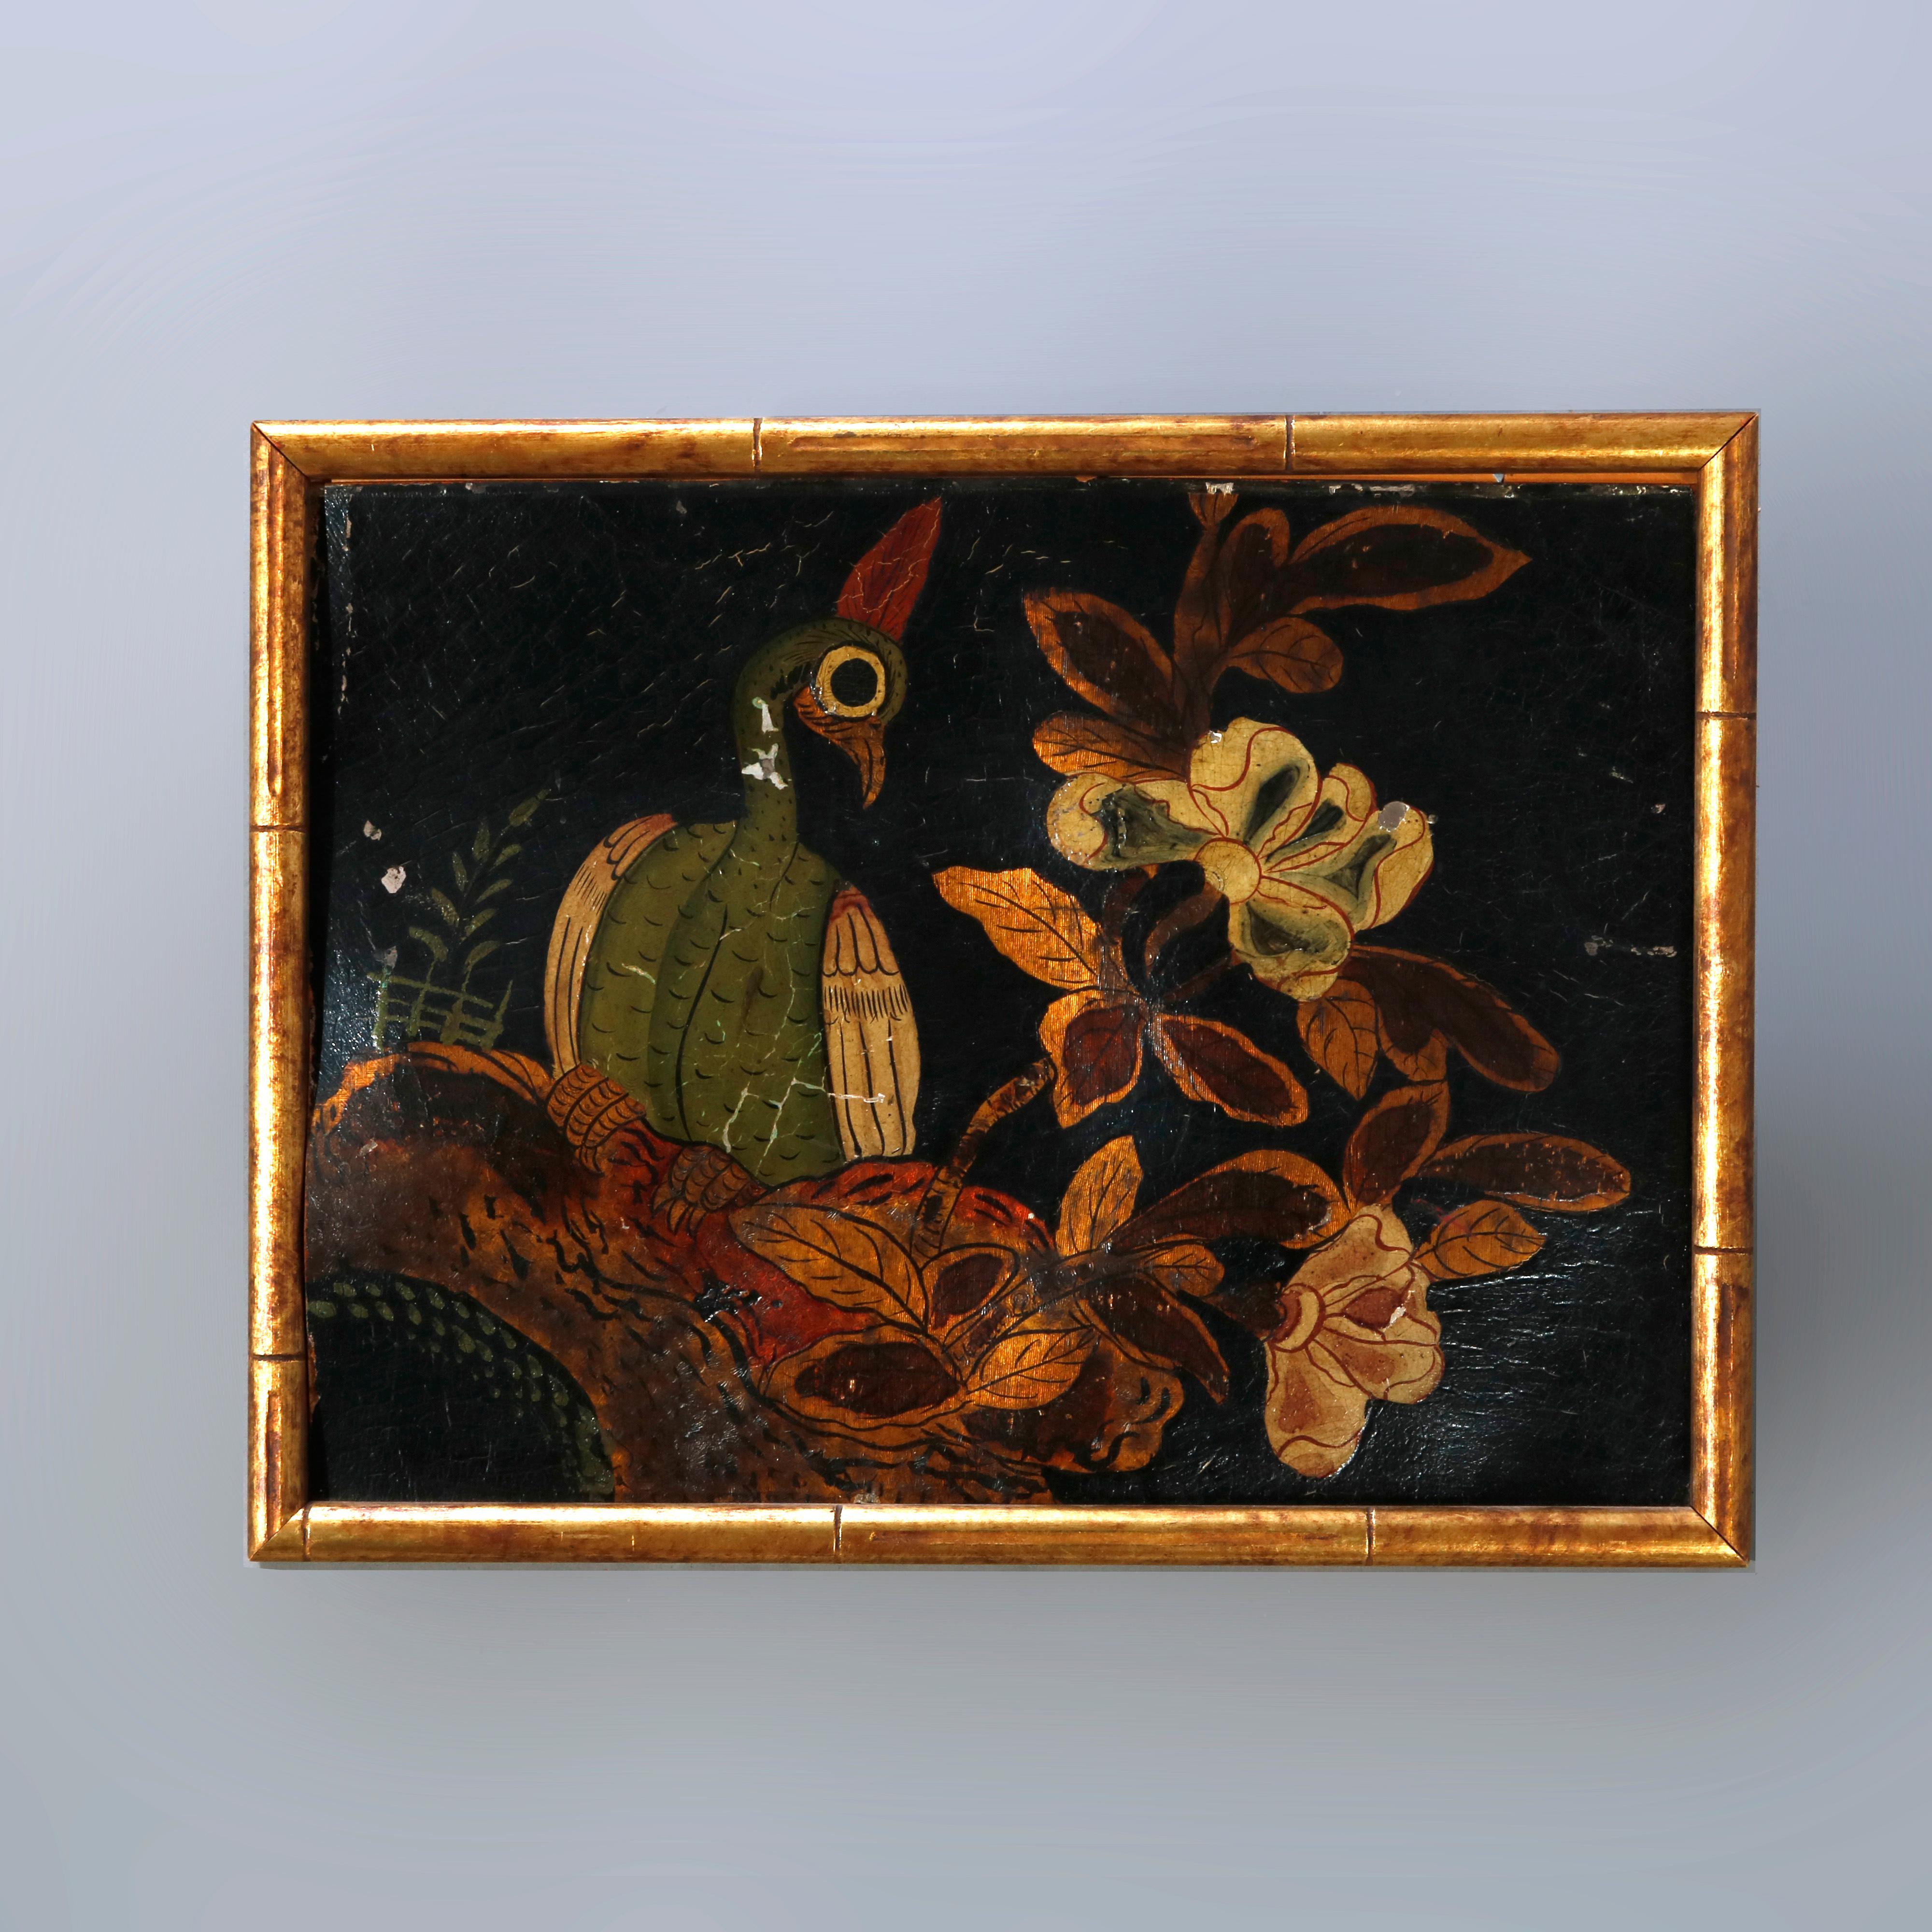 Hand-Painted Six Antique Chinese Oil Paintings on Canvas, Genre & Garden Scenes, 18th-19th C